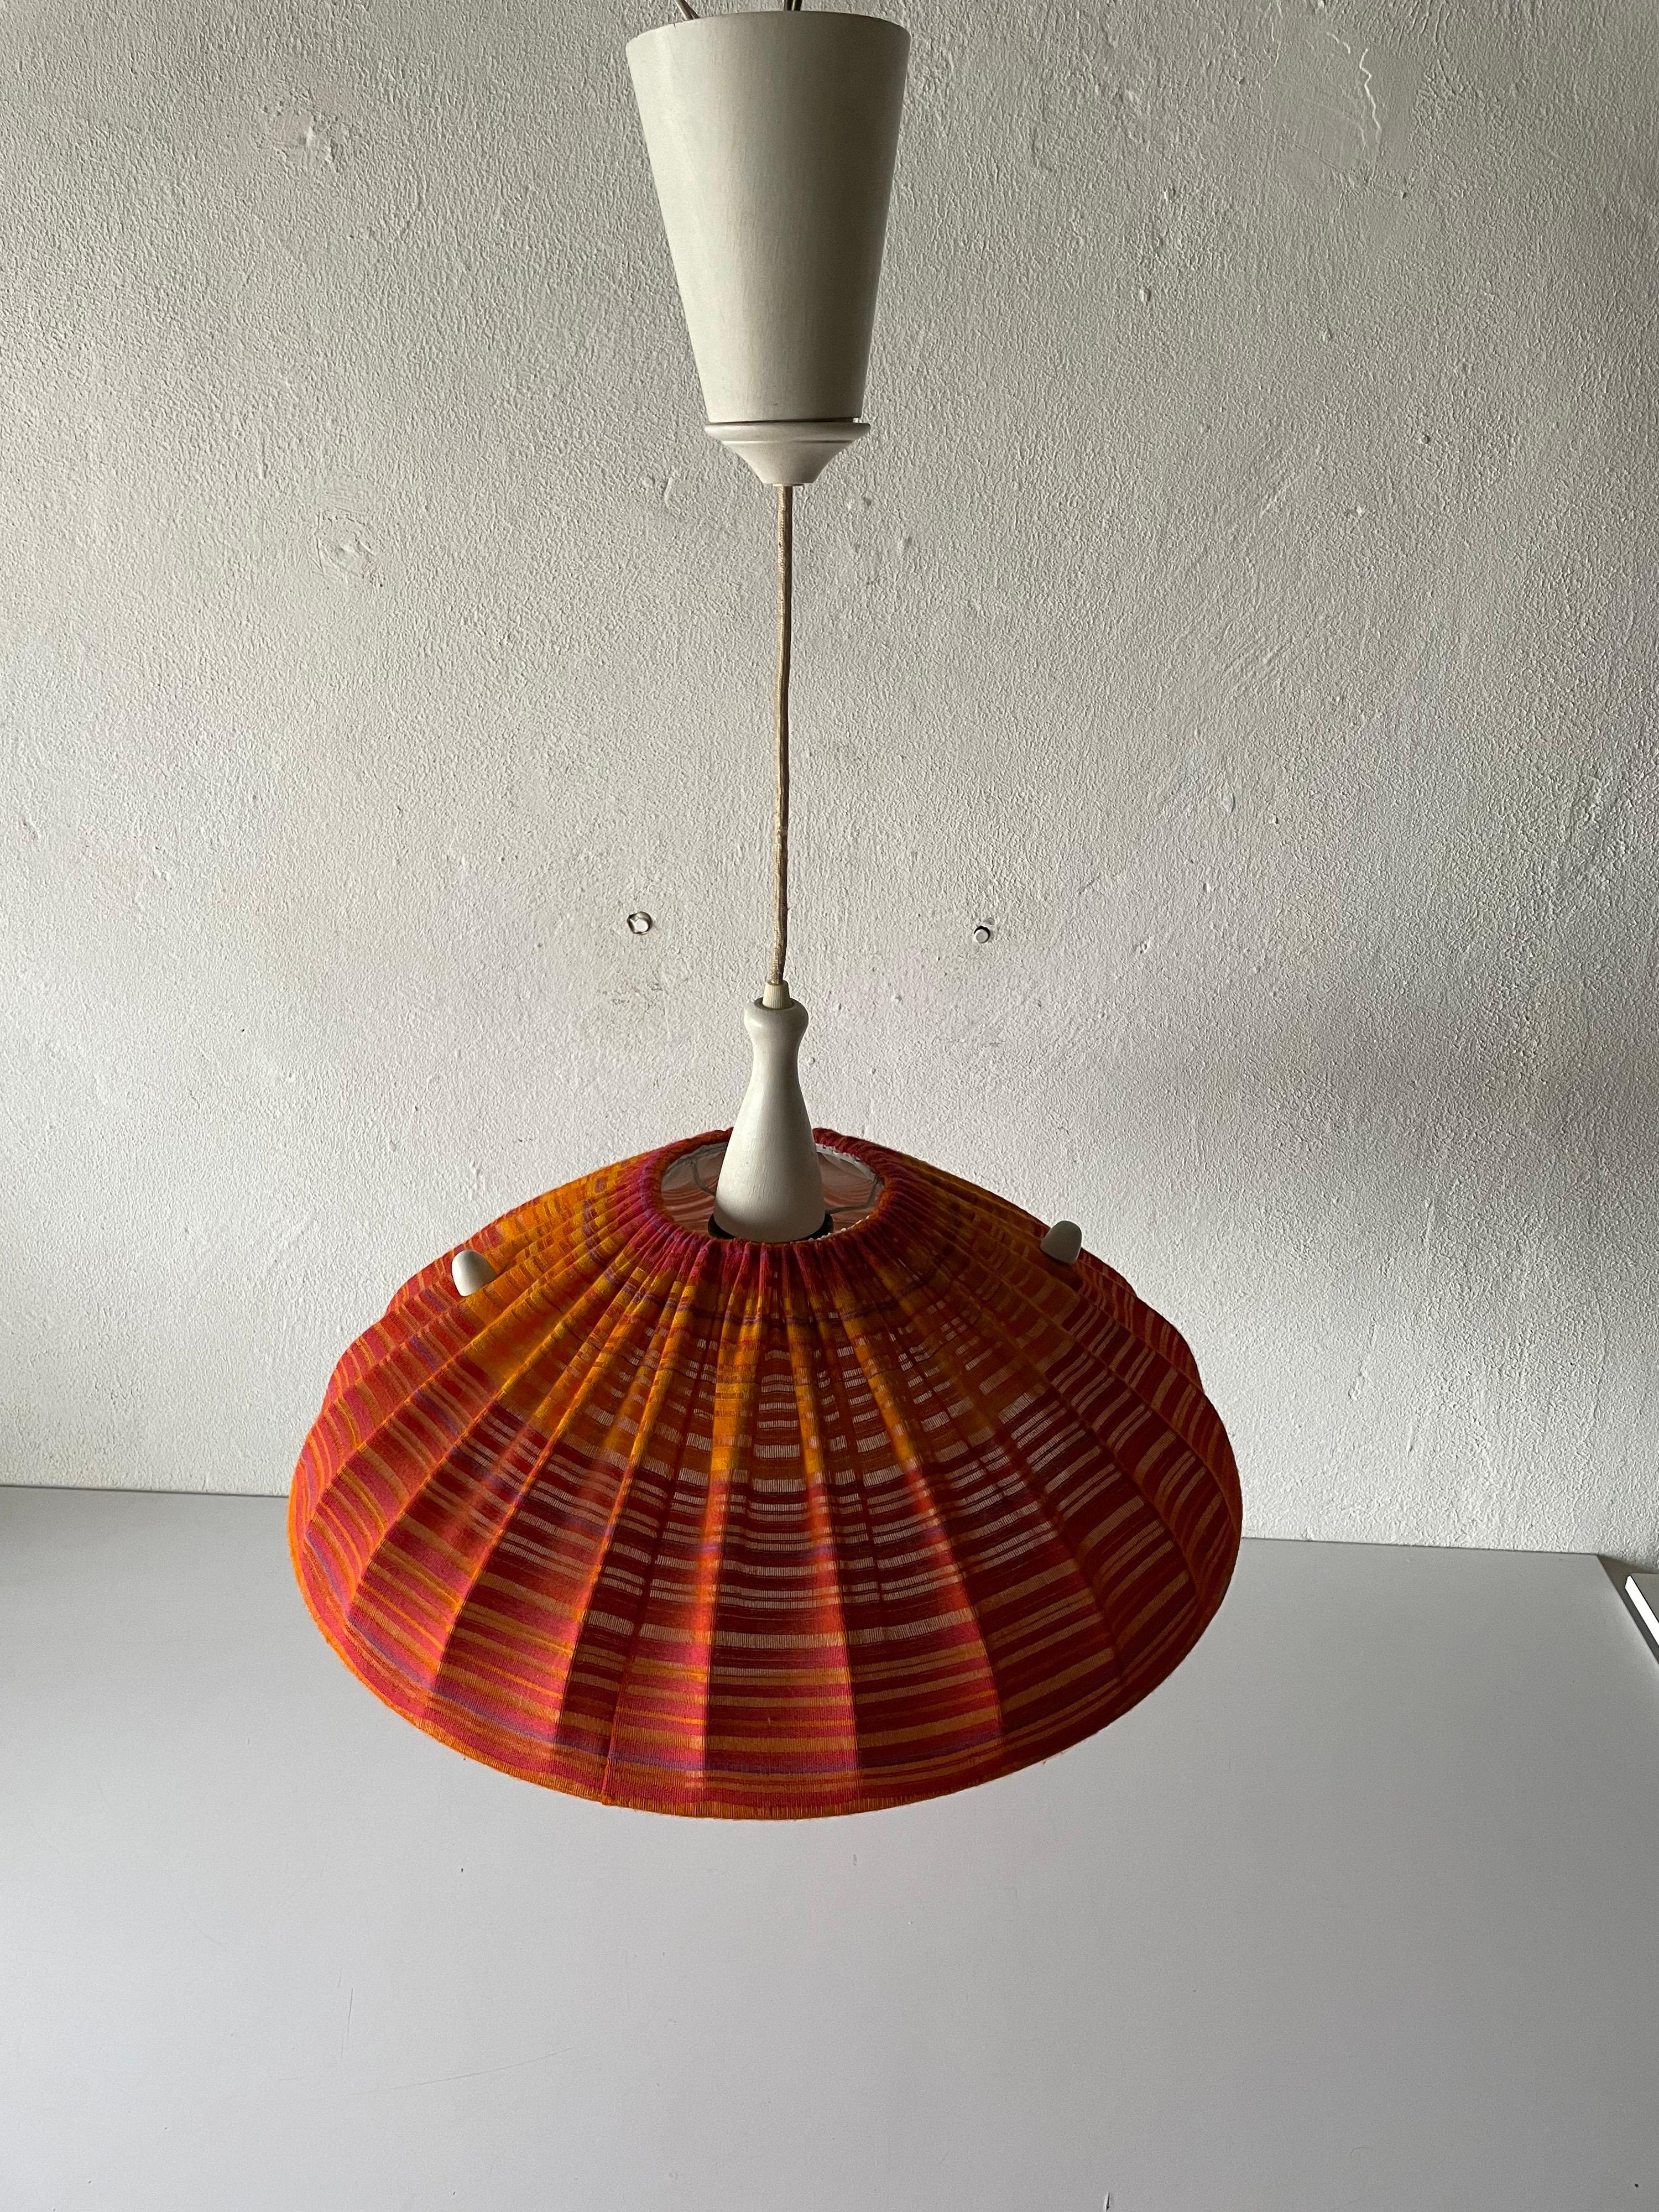 Mid-20th Century Fabric Shade & Wood Large Pendant Lamp by Temde, 1960s, Germany For Sale